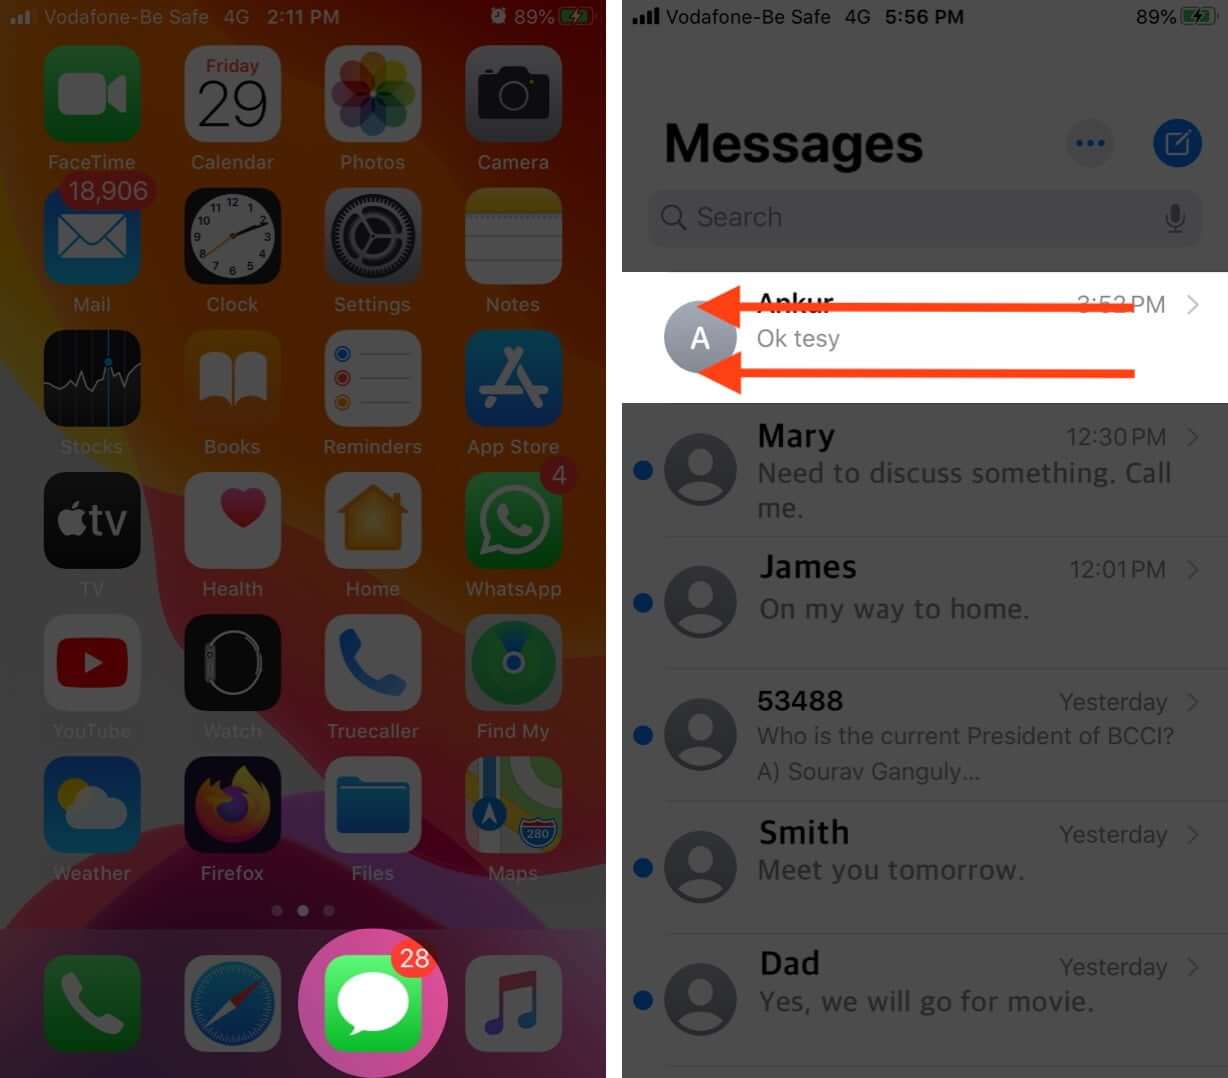 Open Messages App and Swipe Left on Conversation